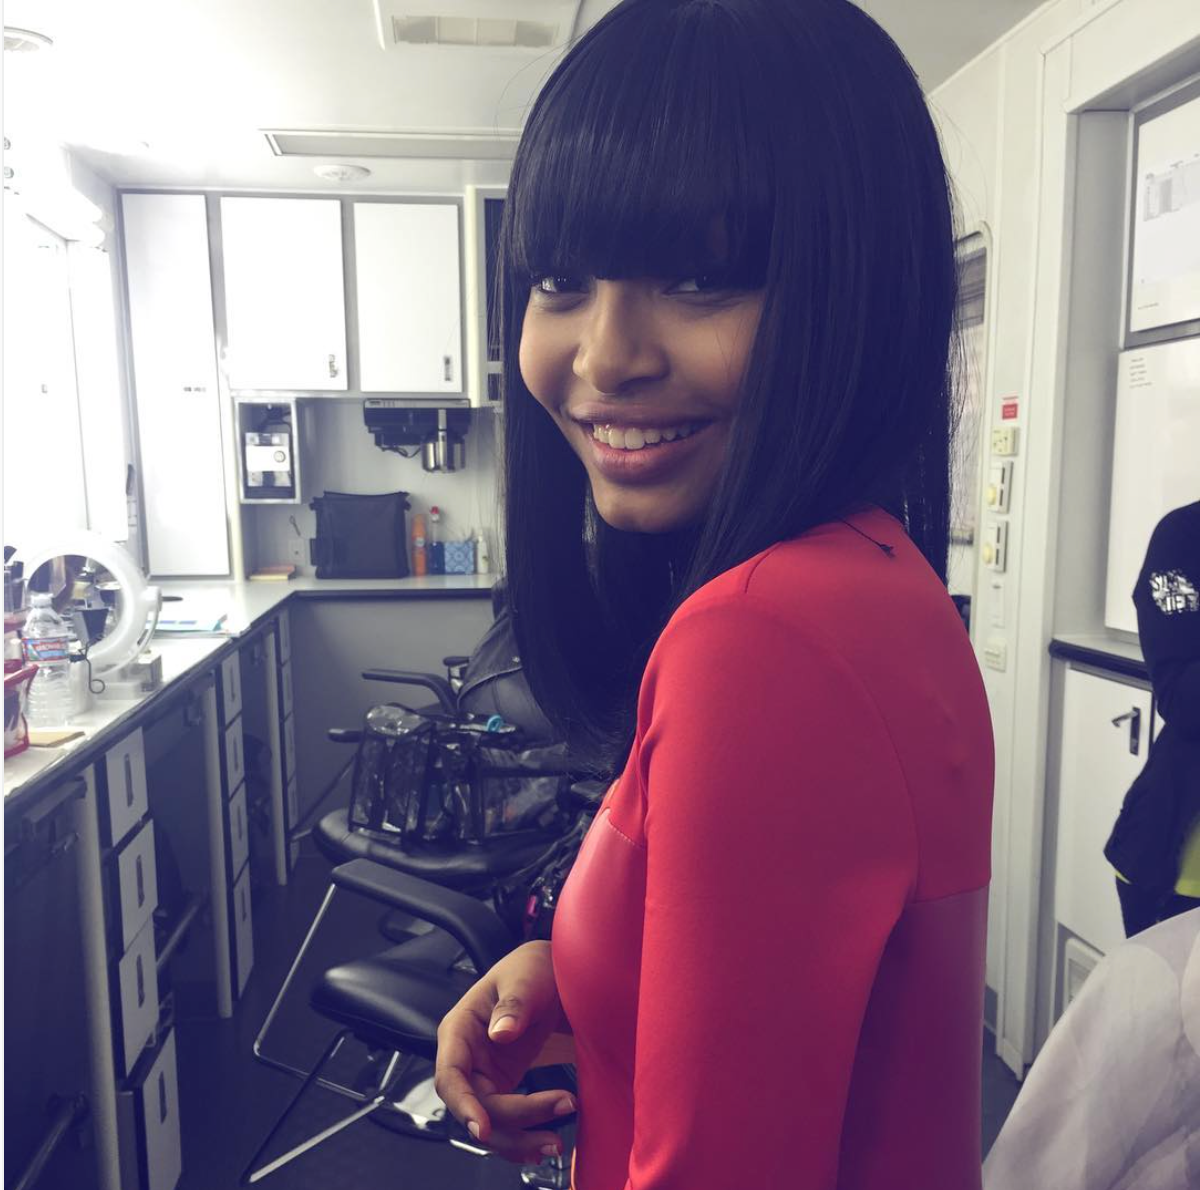 11 Celebrity Bobs That Will Inspire You to Rock Shorter Hair
